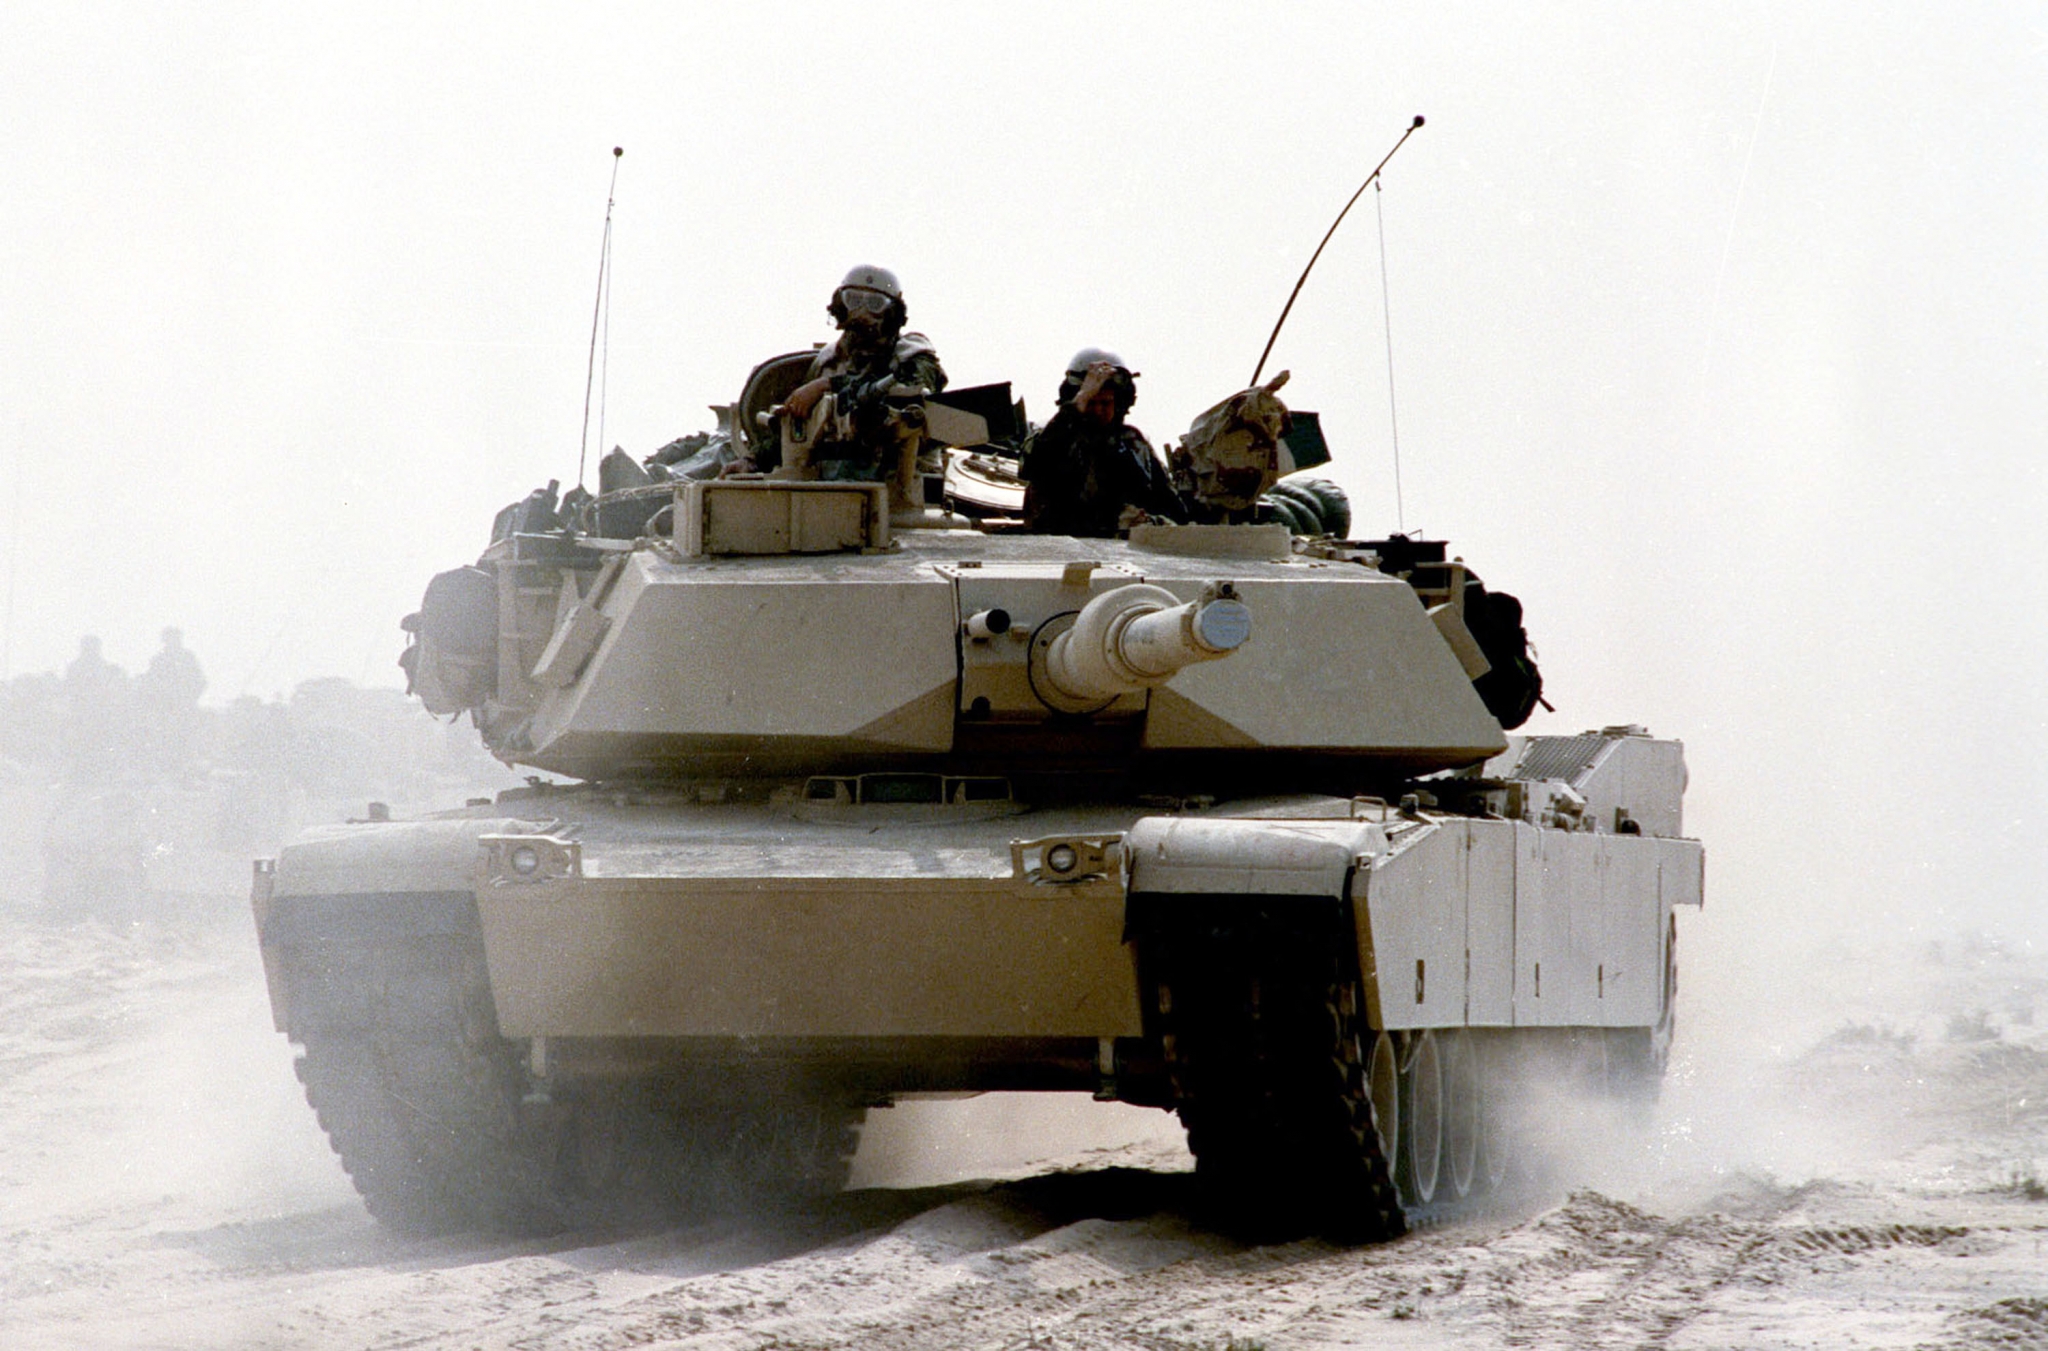 M1A1 Abrams Years active: 1985 - 1992